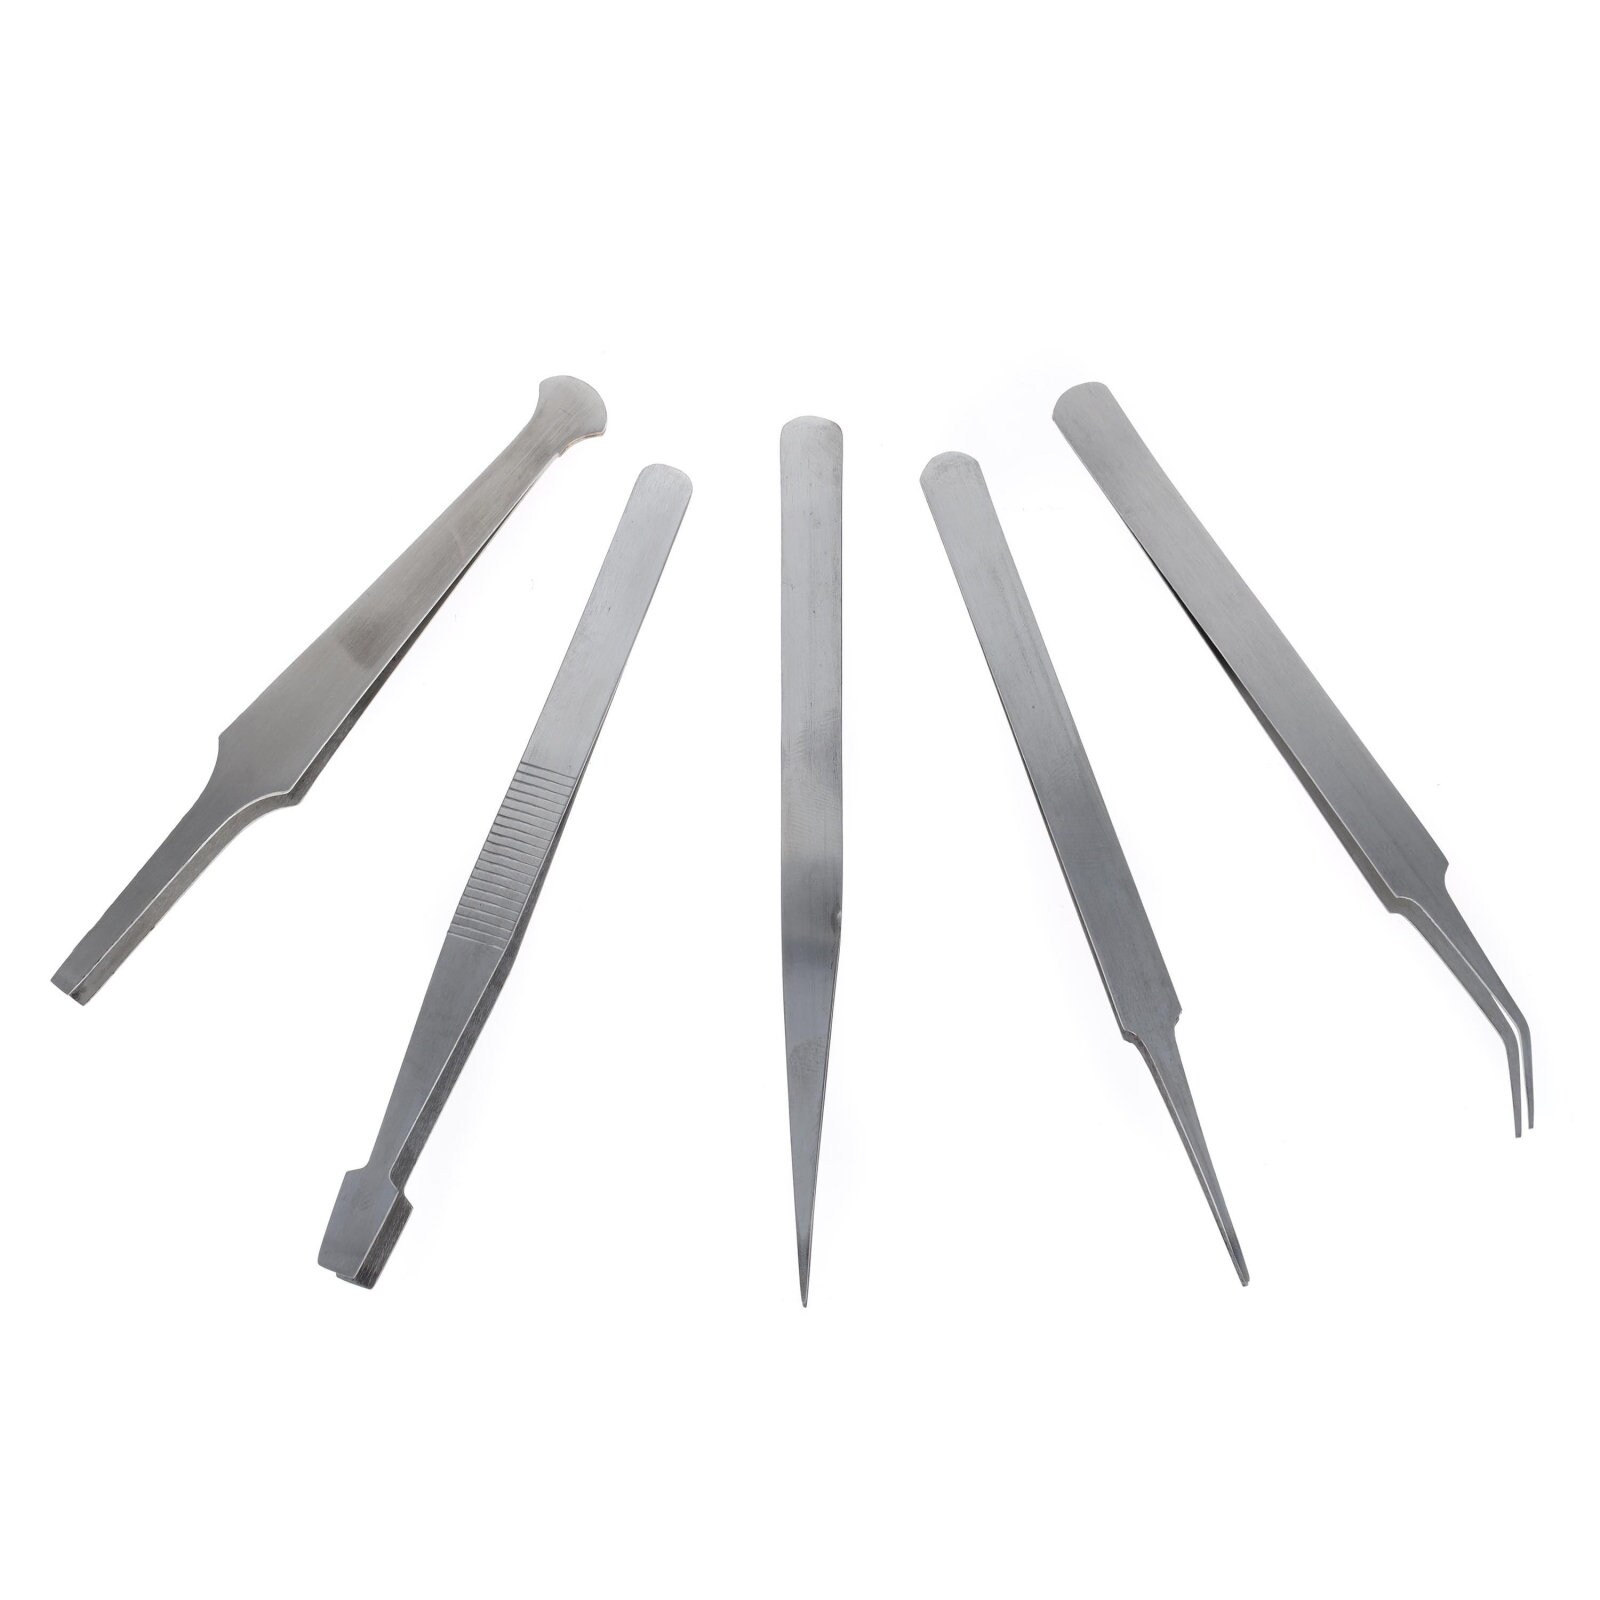 Universal Tool Arts and Crafts Stainless Steel Tweezers Set 